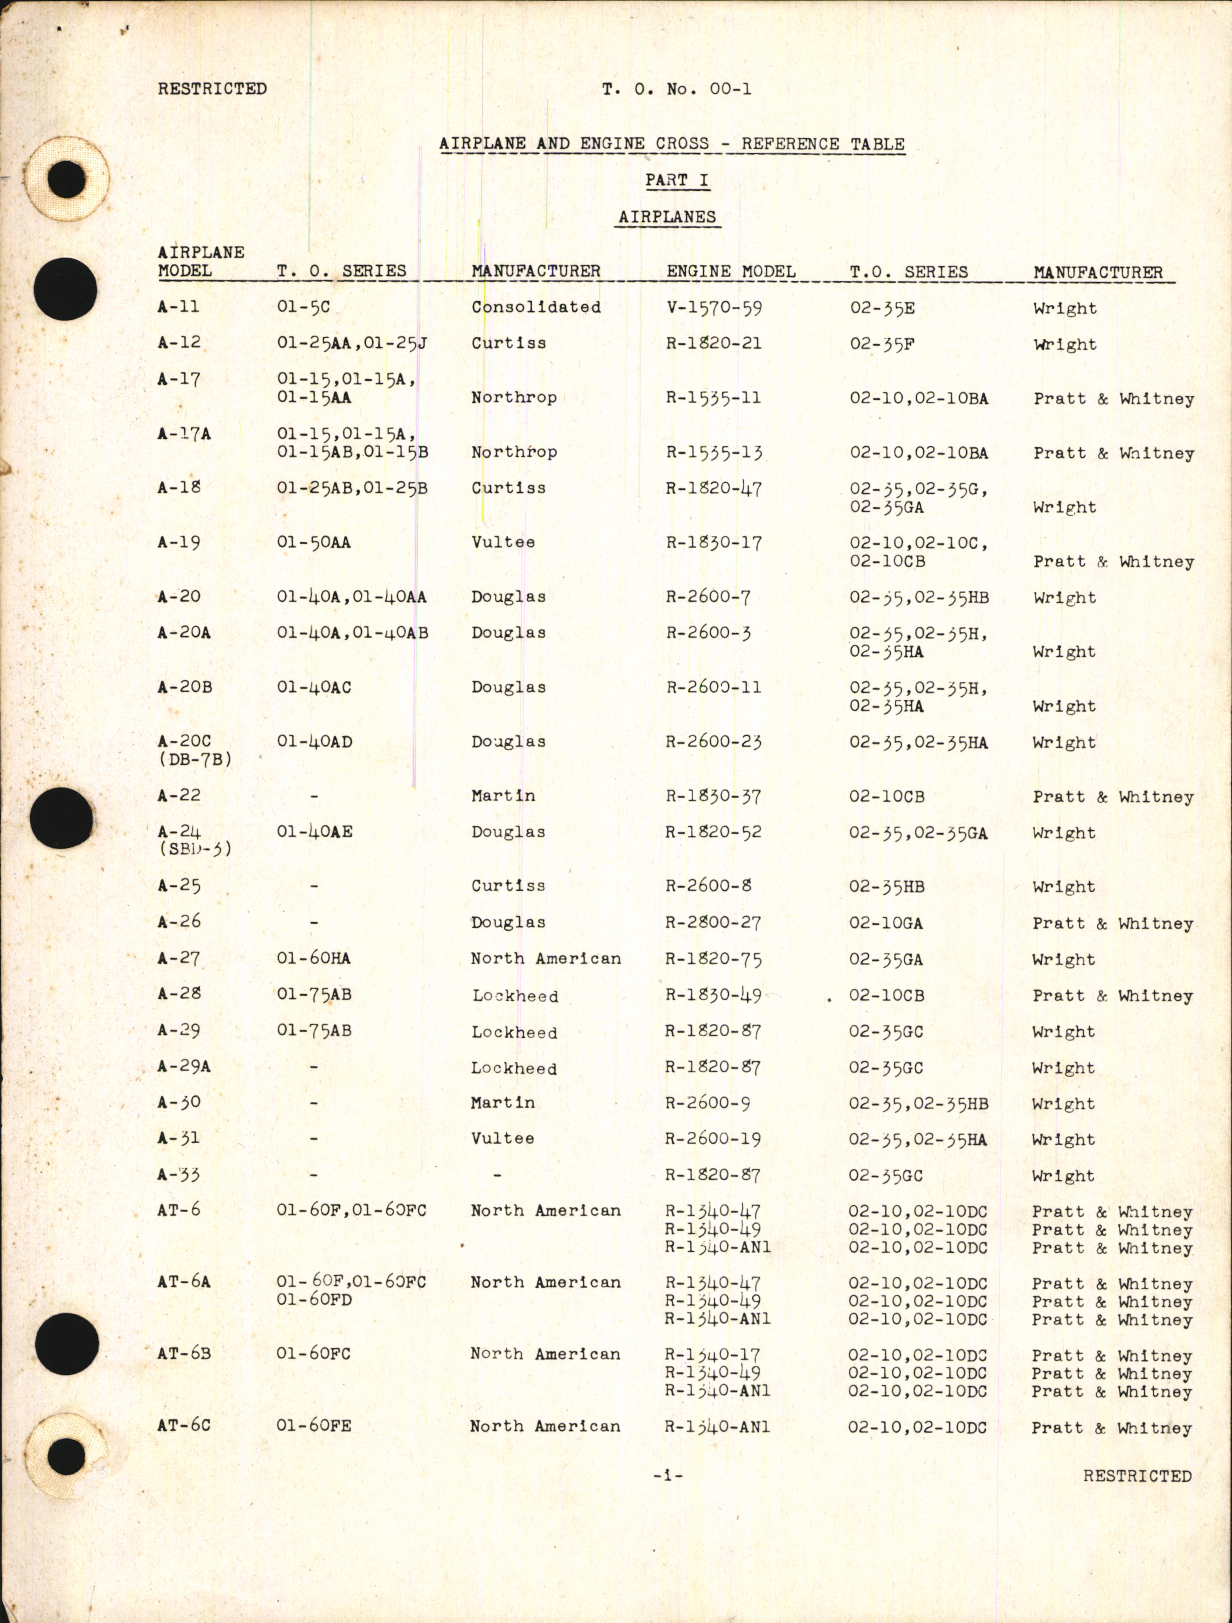 Sample page 1 from AirCorps Library document: Airplane and Engine Cross-Reference Table Part I